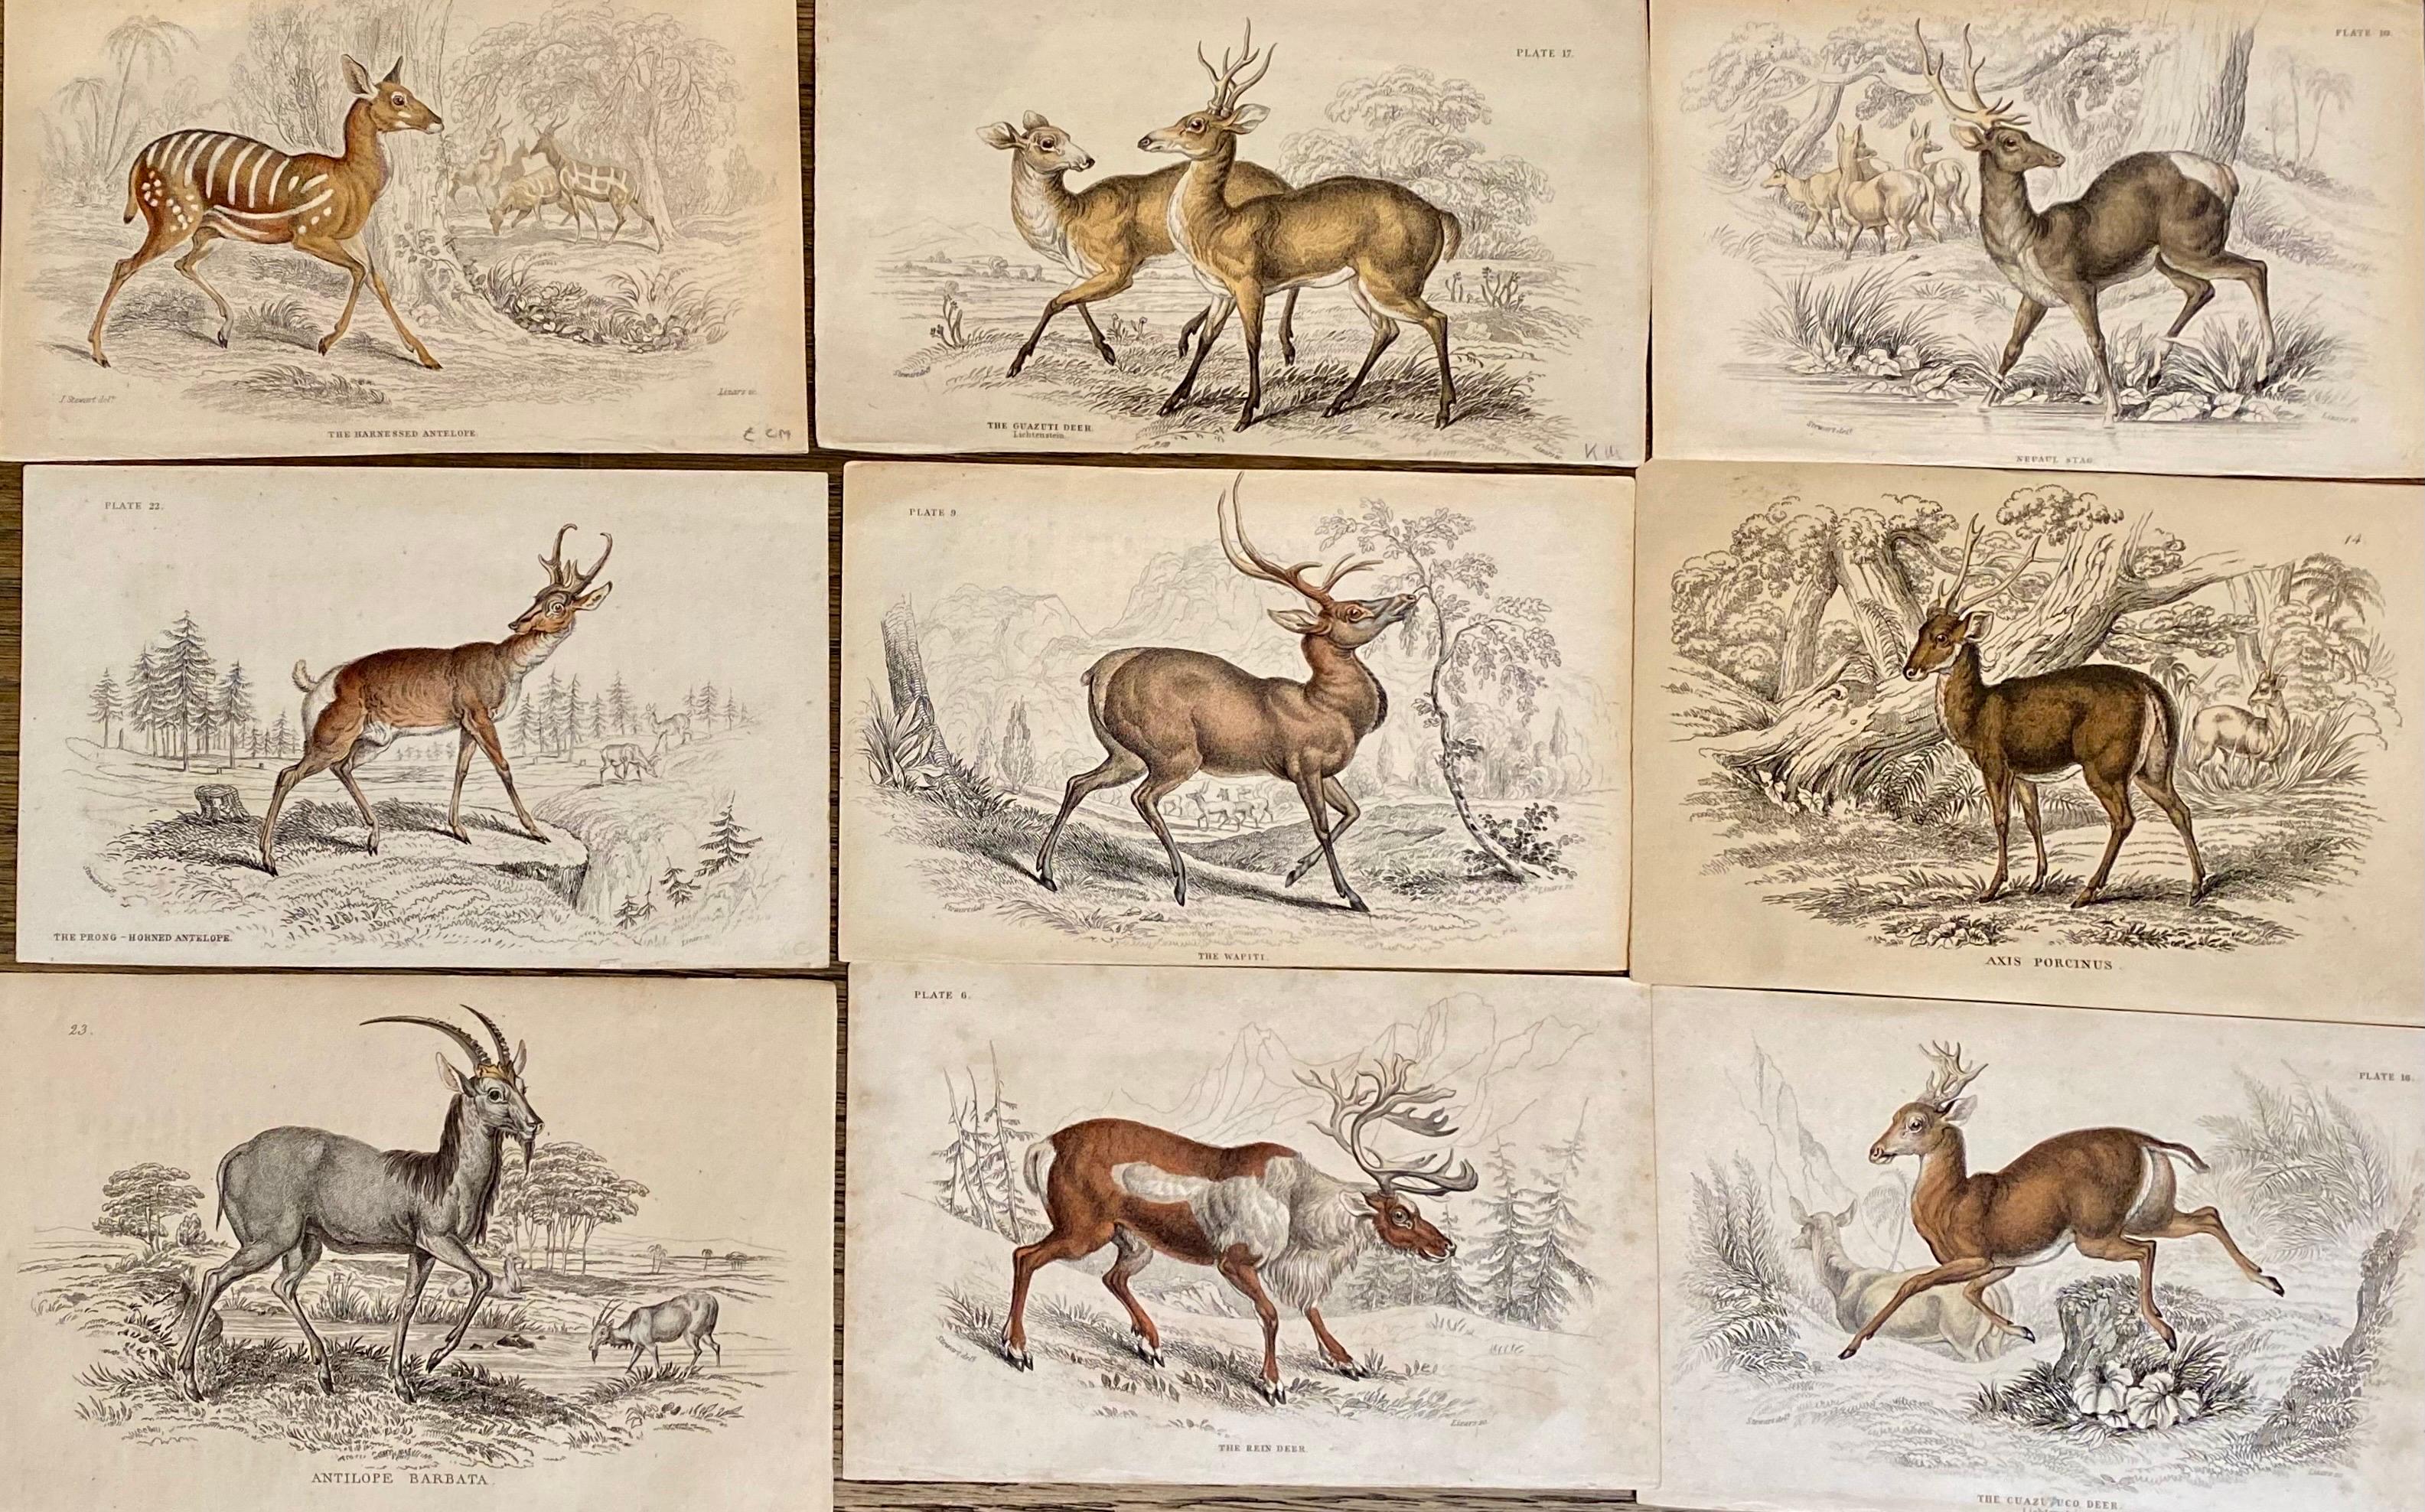 Sir William Jardine, 7th Baronet (after) Animal Painting - Antique Prints of Rare Deers and Antilopes- Exotic Tropical Doe Stag deer